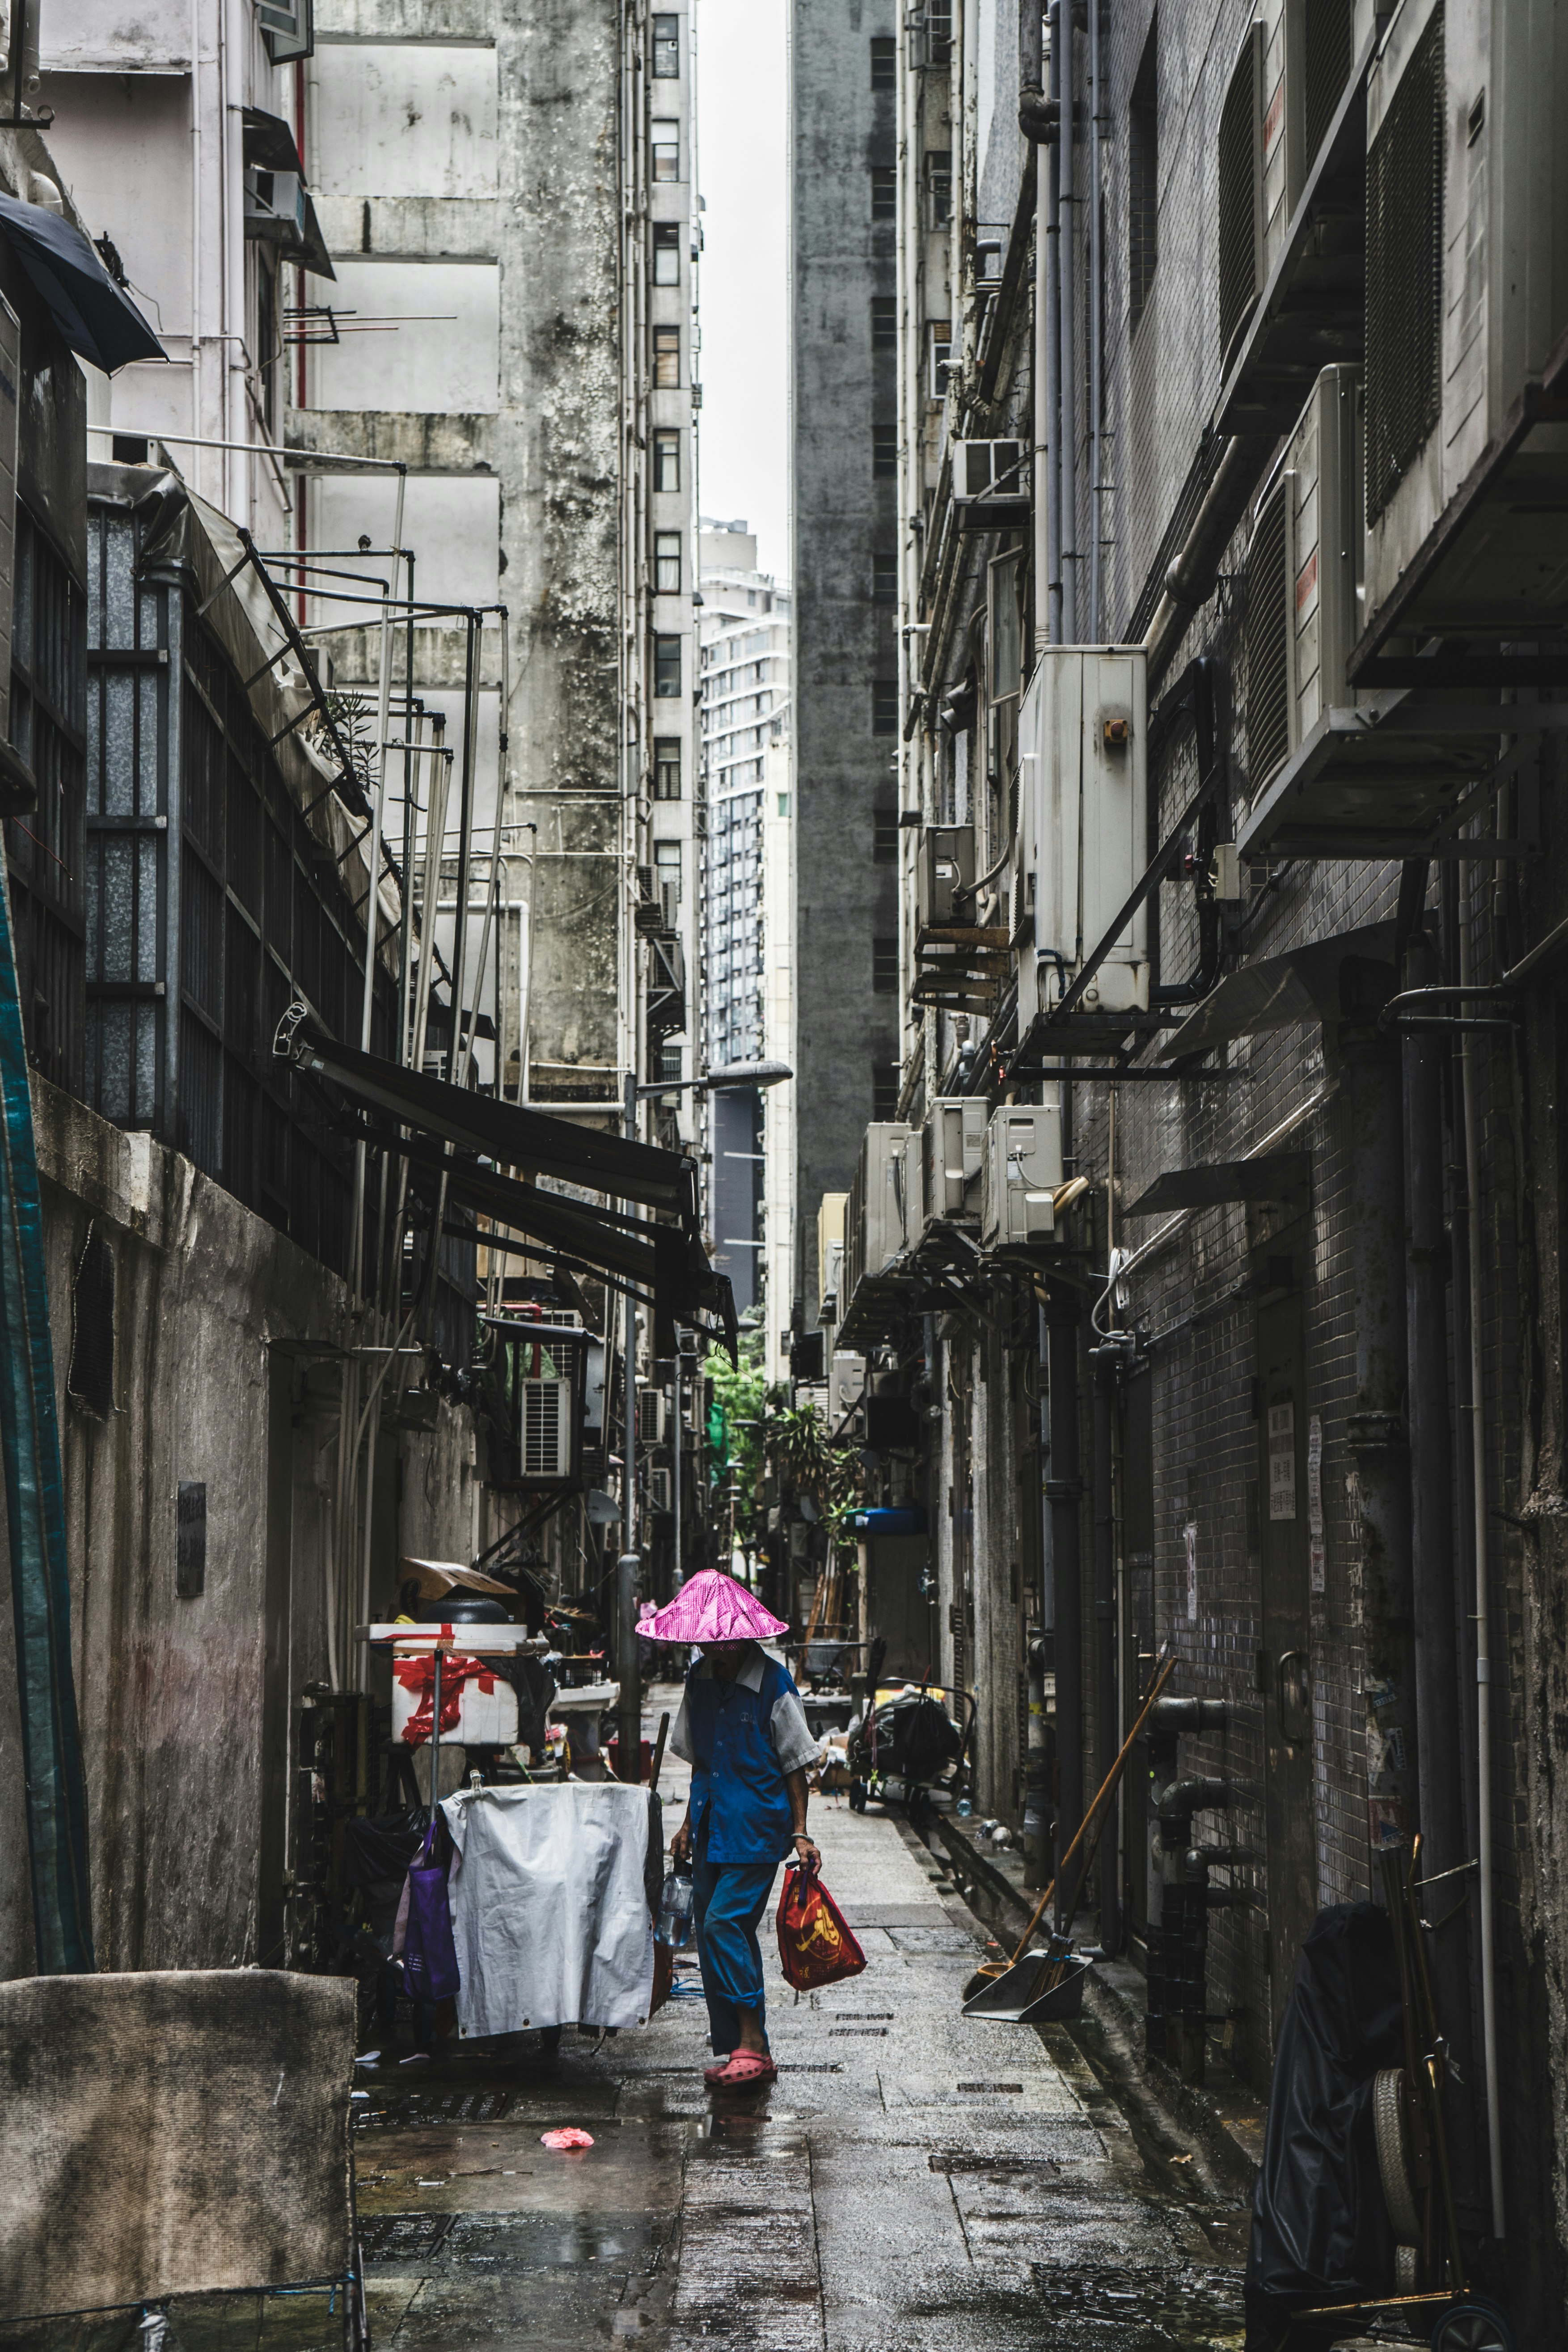 person carrying red bag in alley